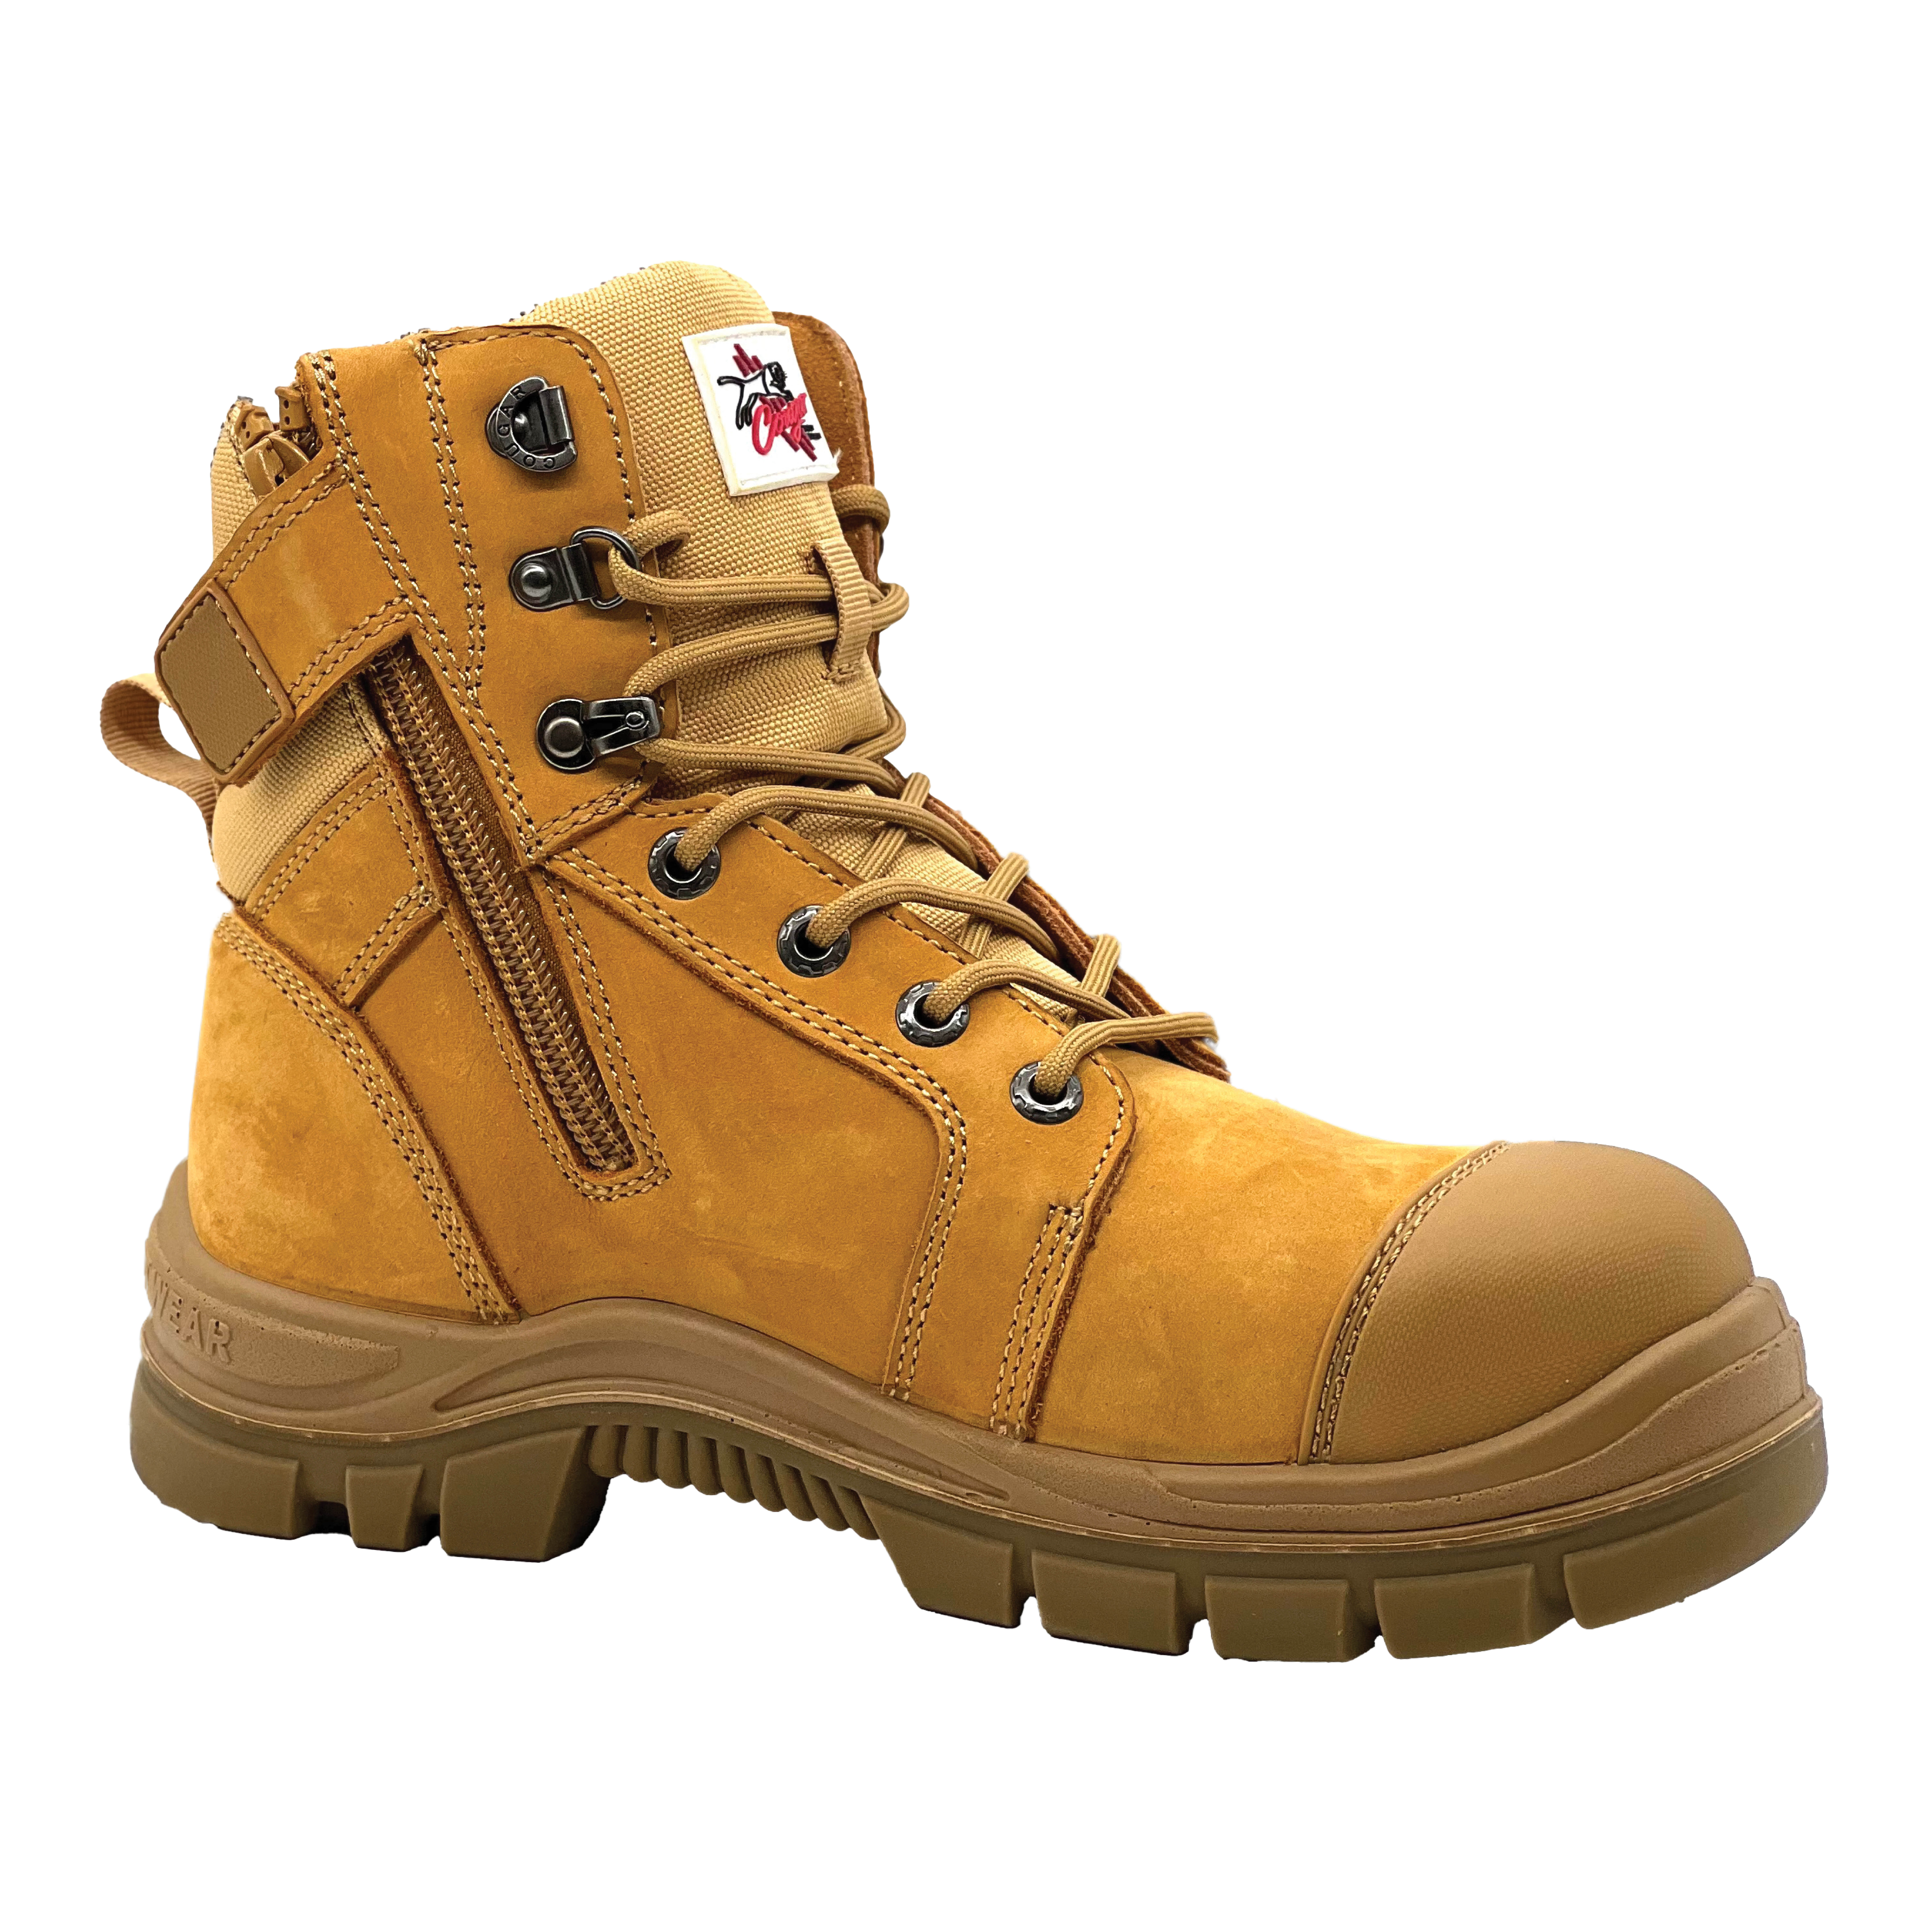 Cougar Lace Up Safety Boots with Toe Bumper Wheat (1 pair)